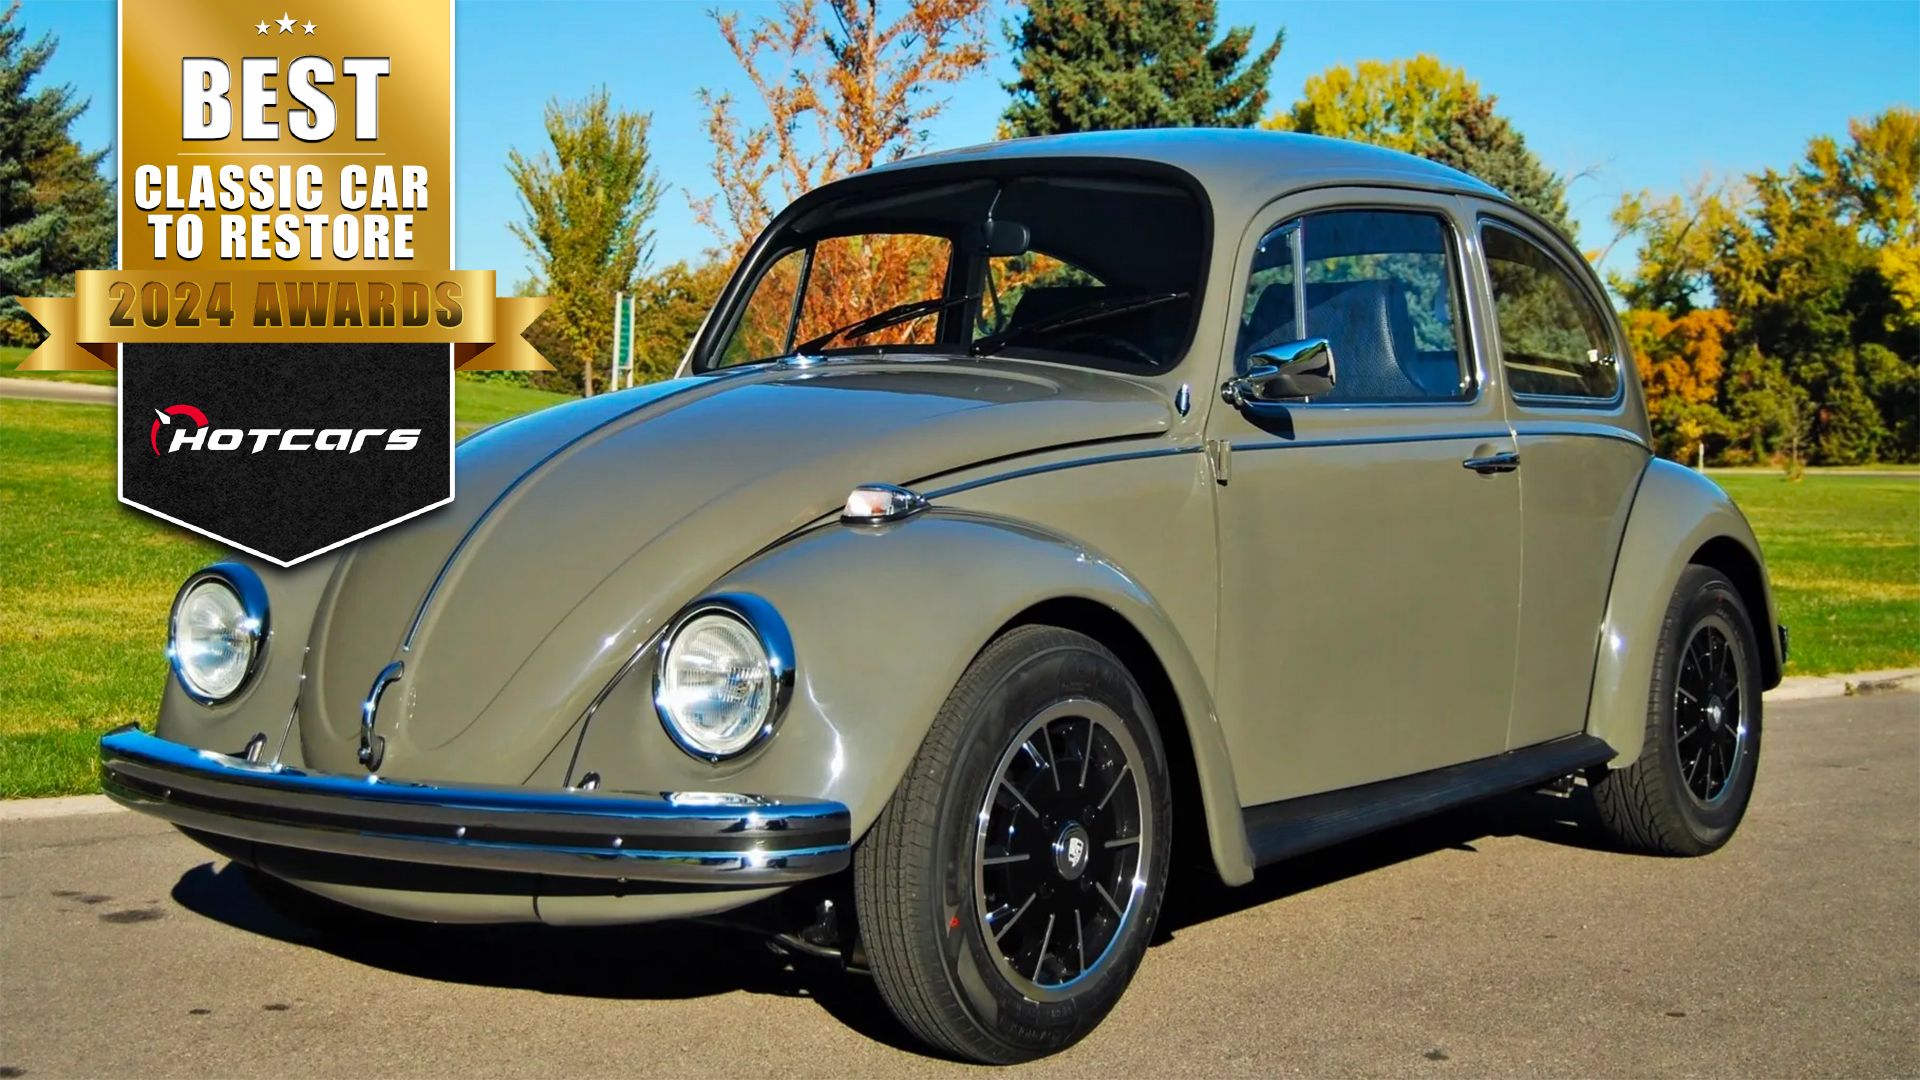 1969 VW Beetle Best Classic Car to Restore